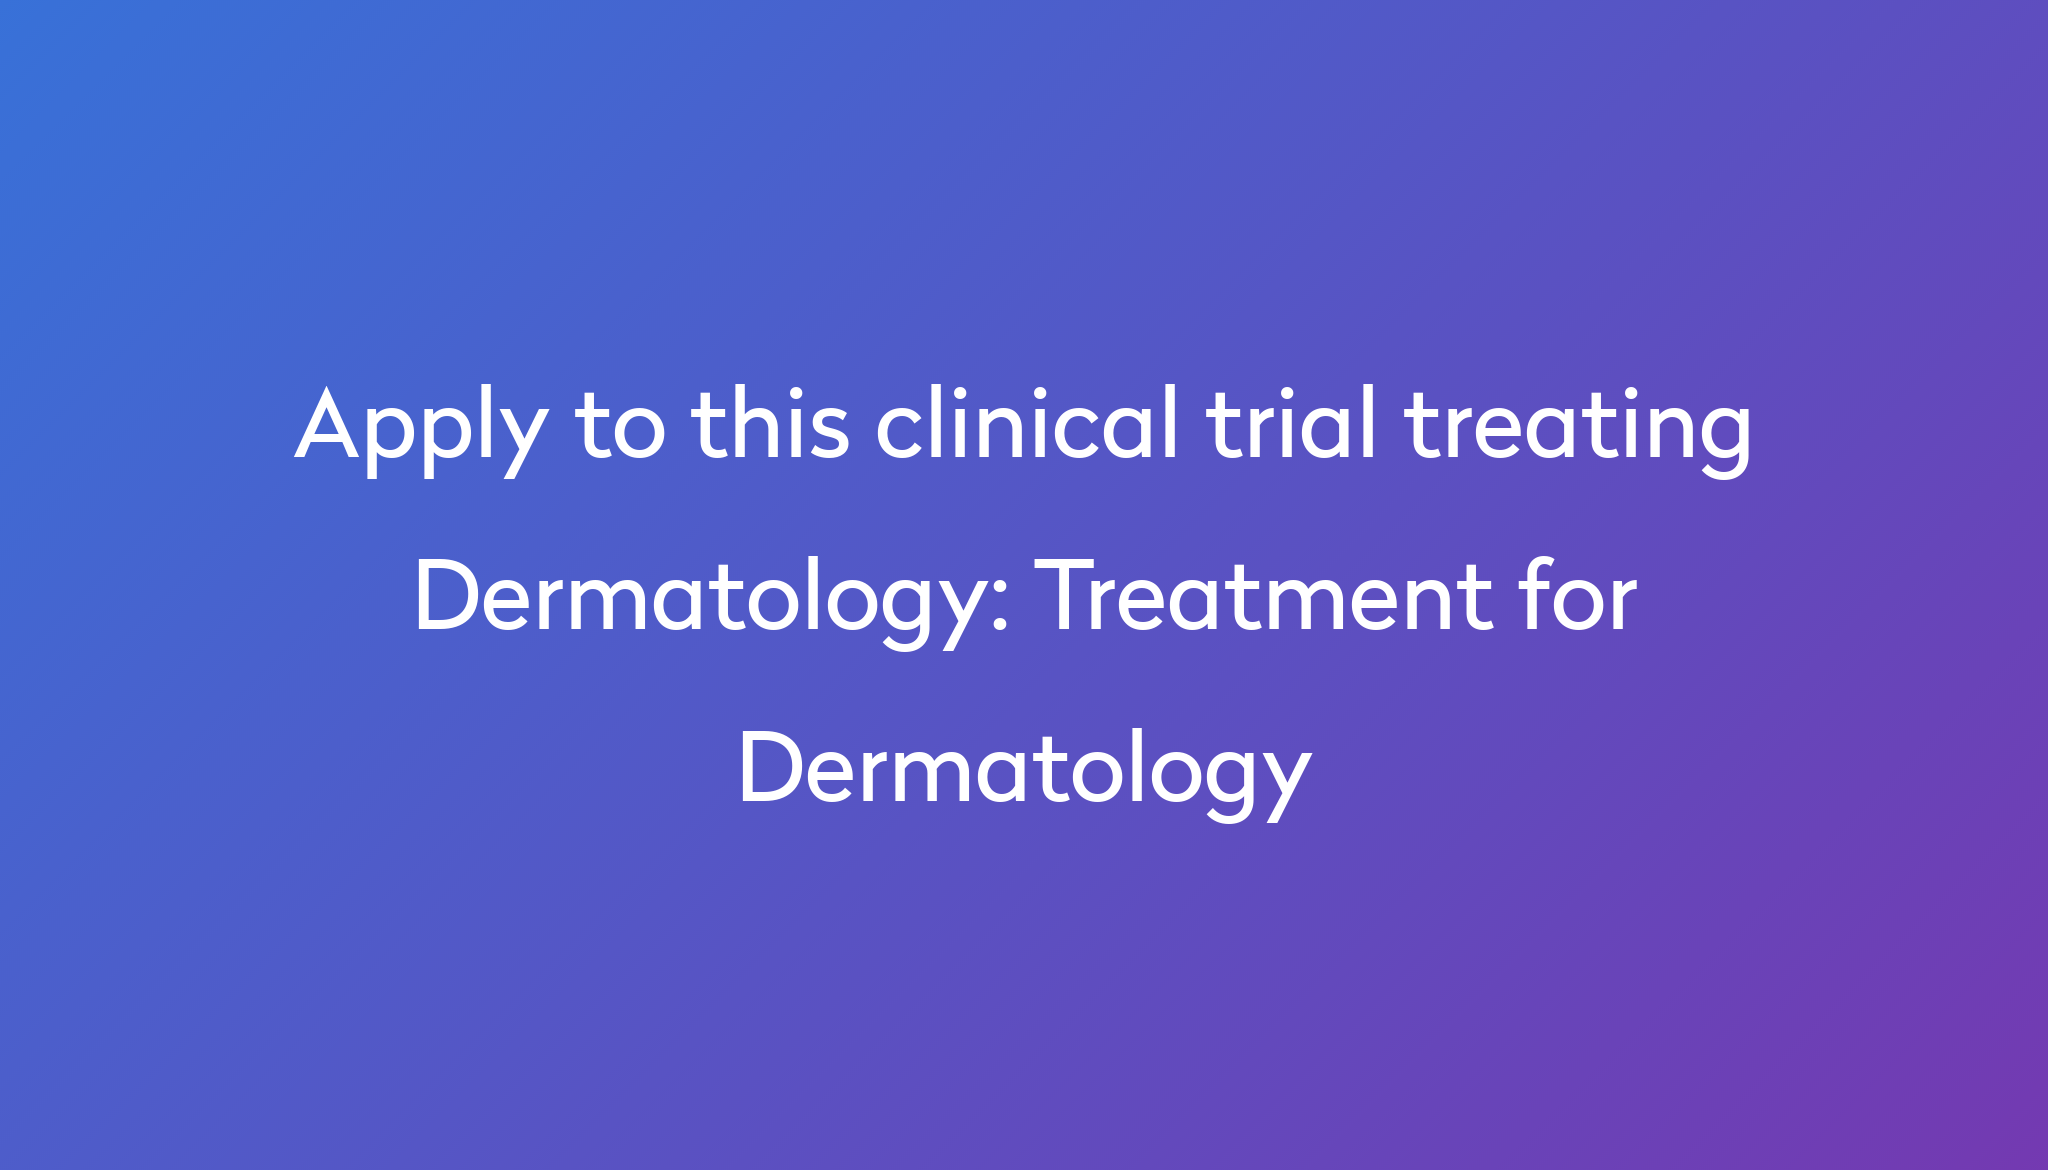 Treatment for Dermatology Clinical Trial 2022 | Power